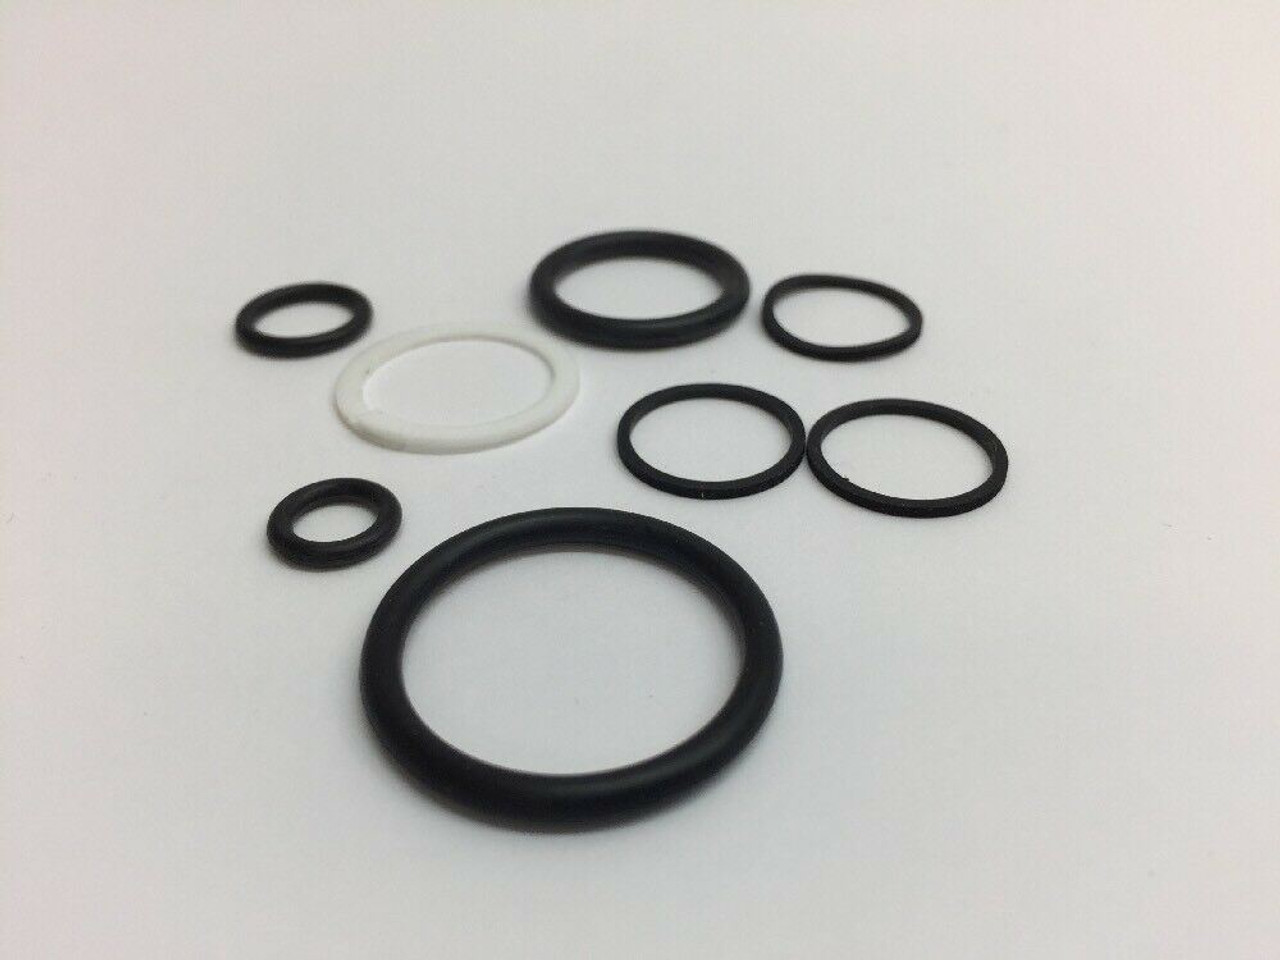 Seal Kit 922625 Vickers - Sizes: 1/4", 3/8", 1/2", 3/4", 7/8", 1"